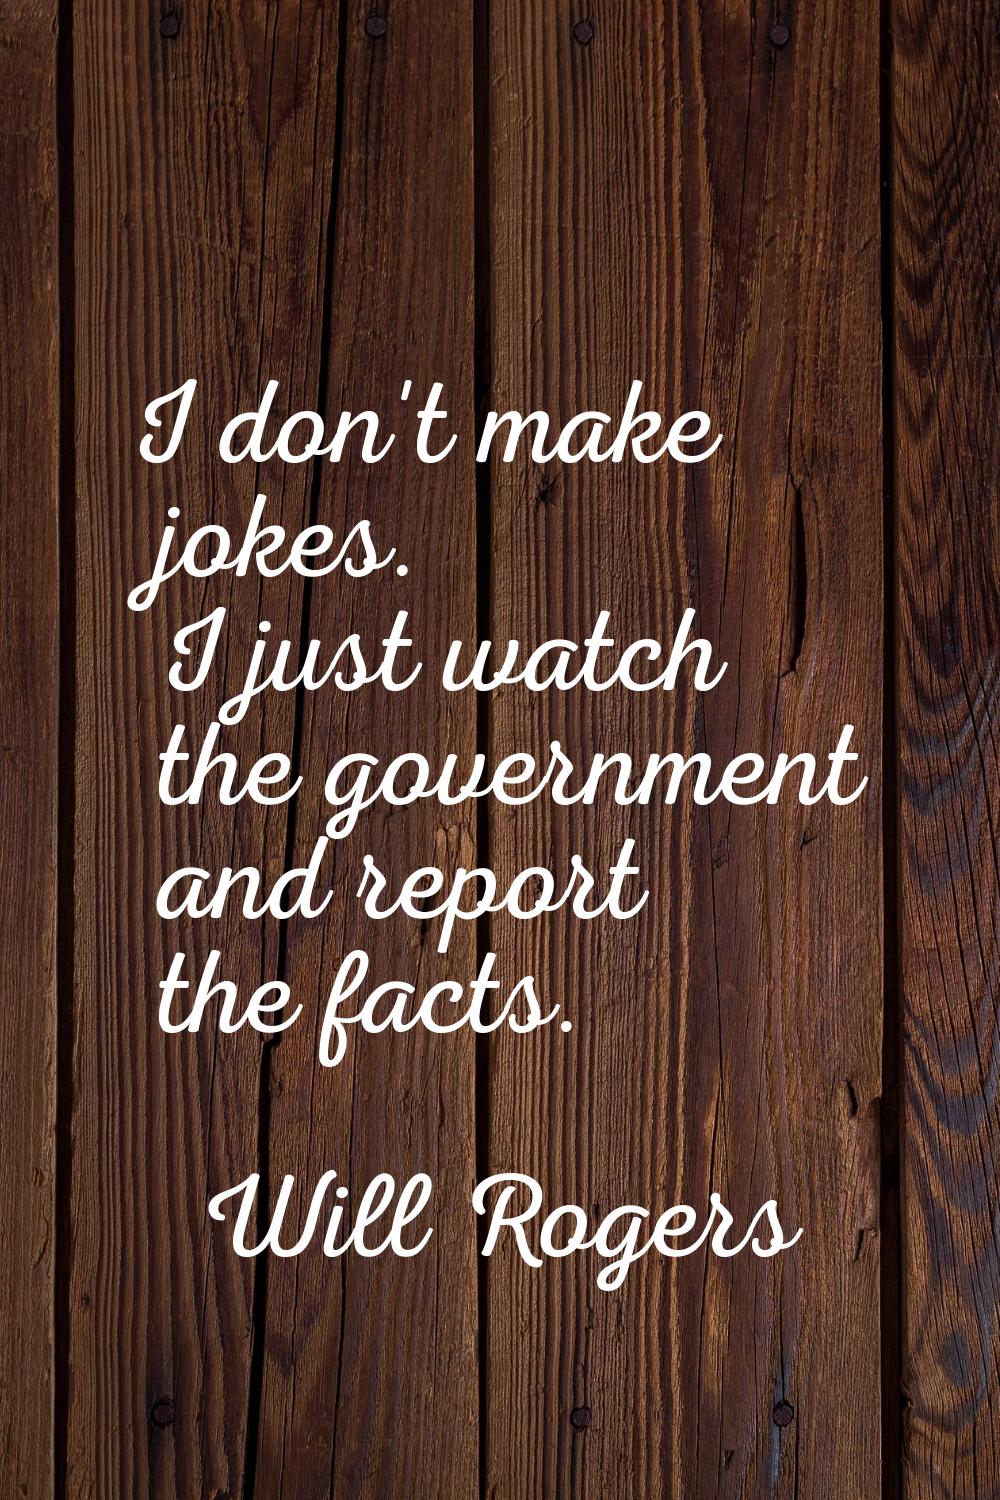 I don't make jokes. I just watch the government and report the facts.